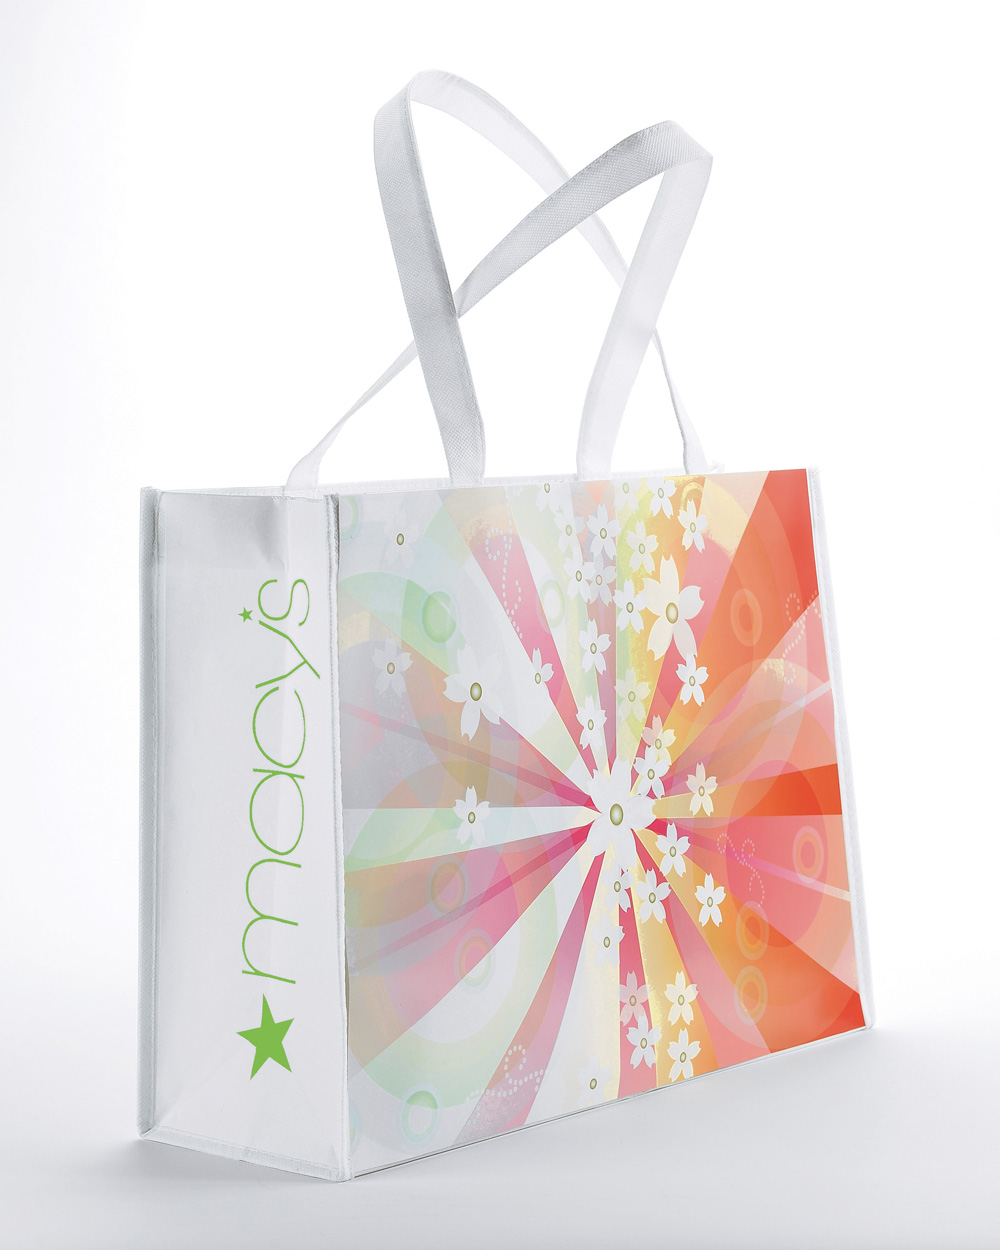 Macy’s ‘Turn Over a New Leaf’ with Eco-Chic Items